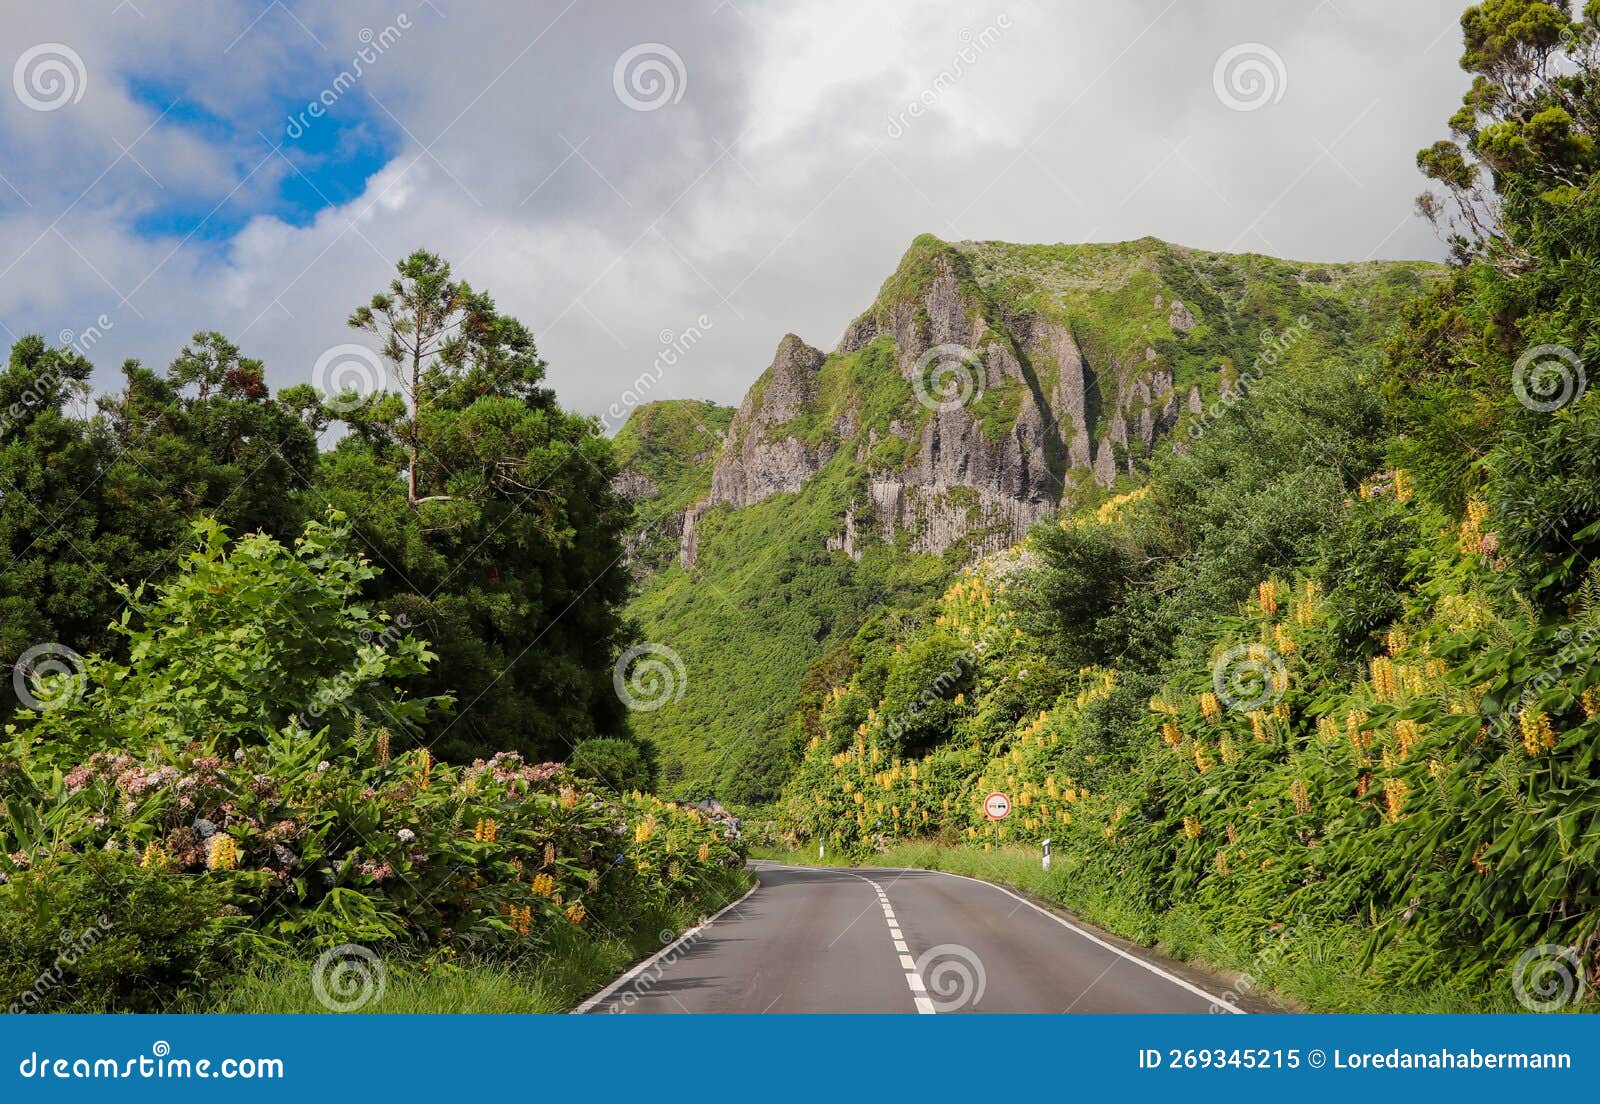 street view of basalt cliffs of rocha dos bordoes on flores island, azores, portugal